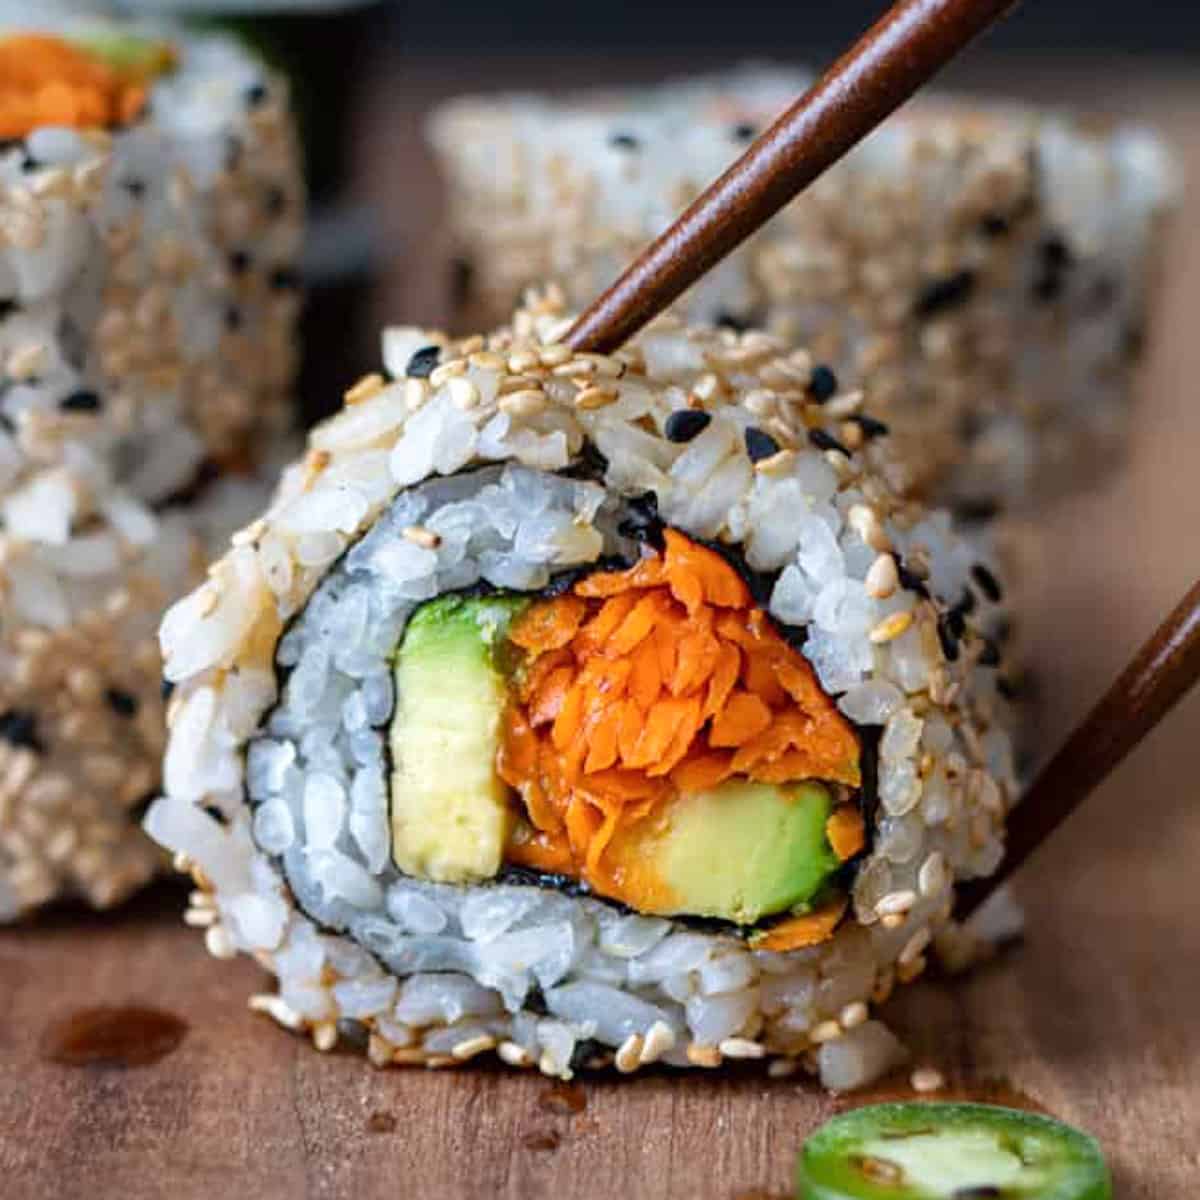 https://simplyceecee.co/wp-content/uploads/2021/04/sushi-recipe-card-square.jpg